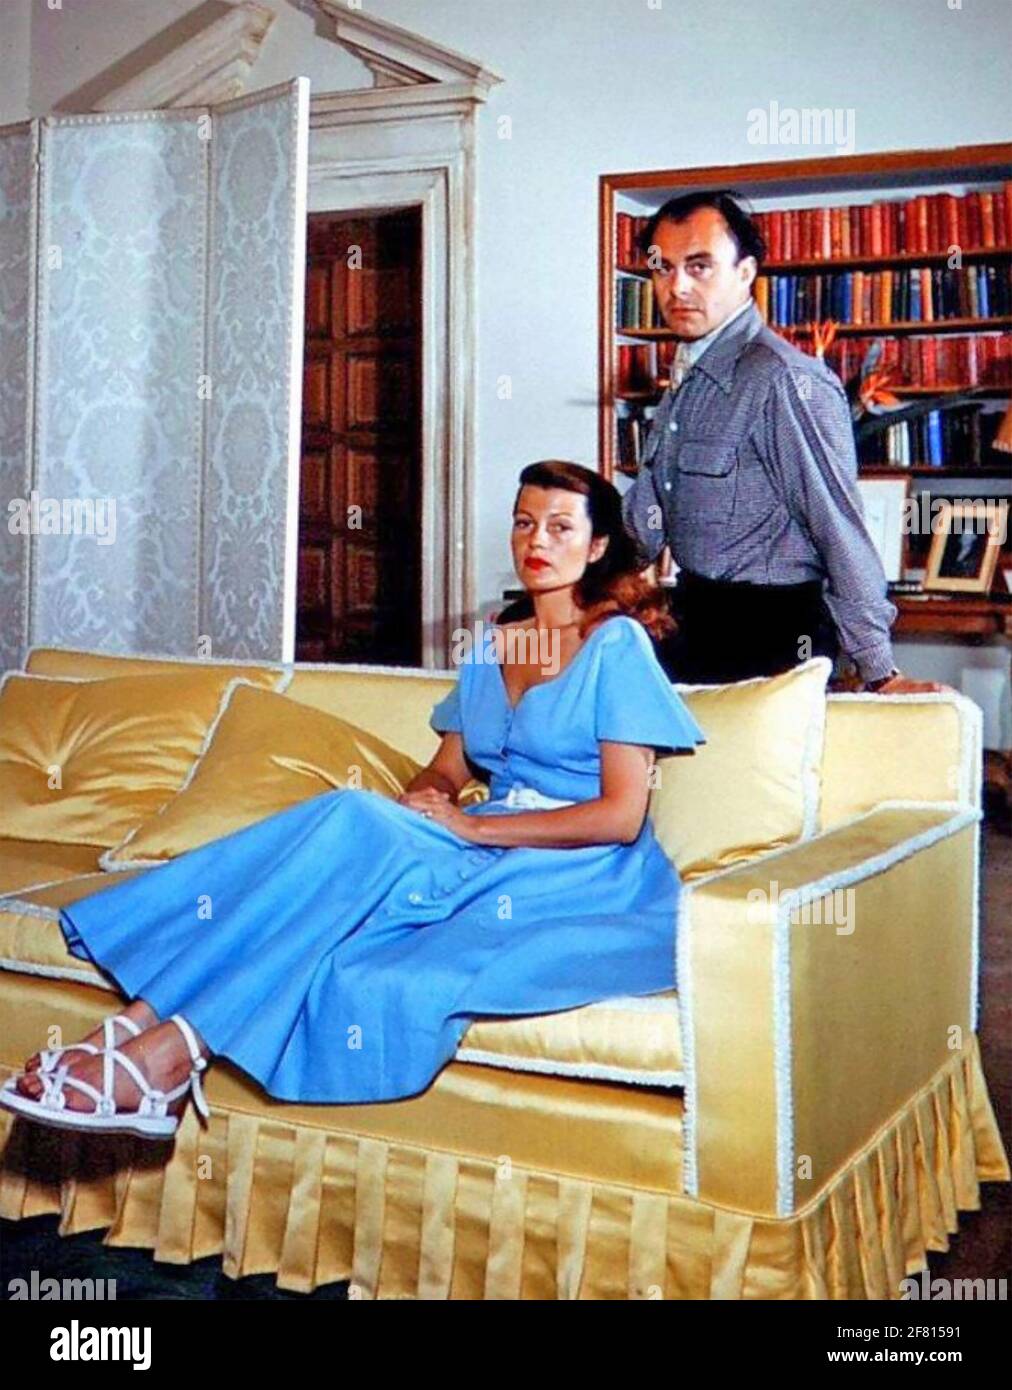 RITA HAYWORTH American film actress with her third husband Prince Aly Khan about 1950 with the strain in their marriage clearly showing. Stock Photo